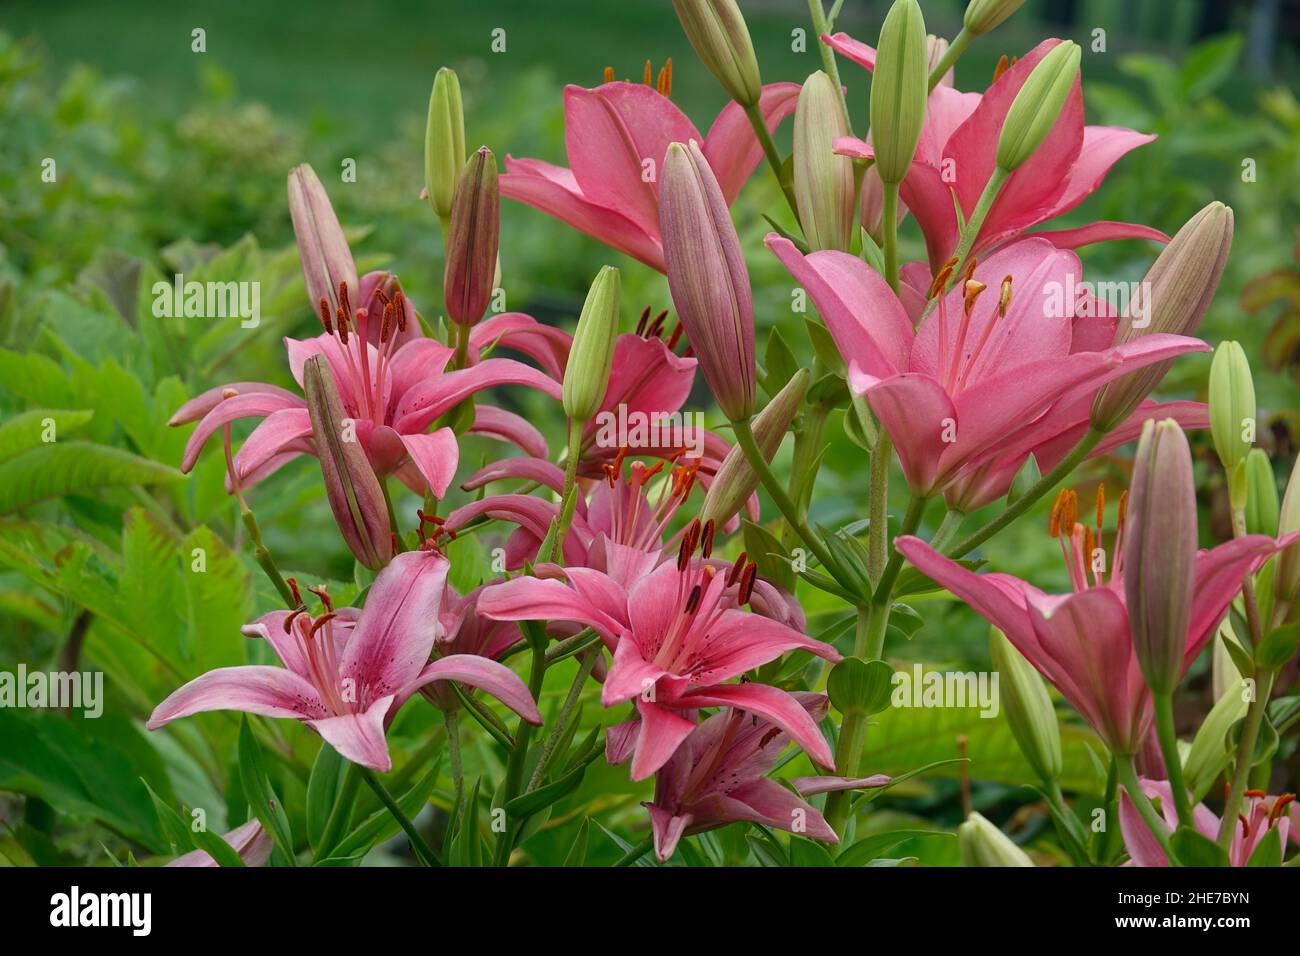 A Cluster of Upright Pink Lily Flowers, Asiatic Lilies, Hybrid Lily with Dark Pink Spots on the Petals Stock Photo